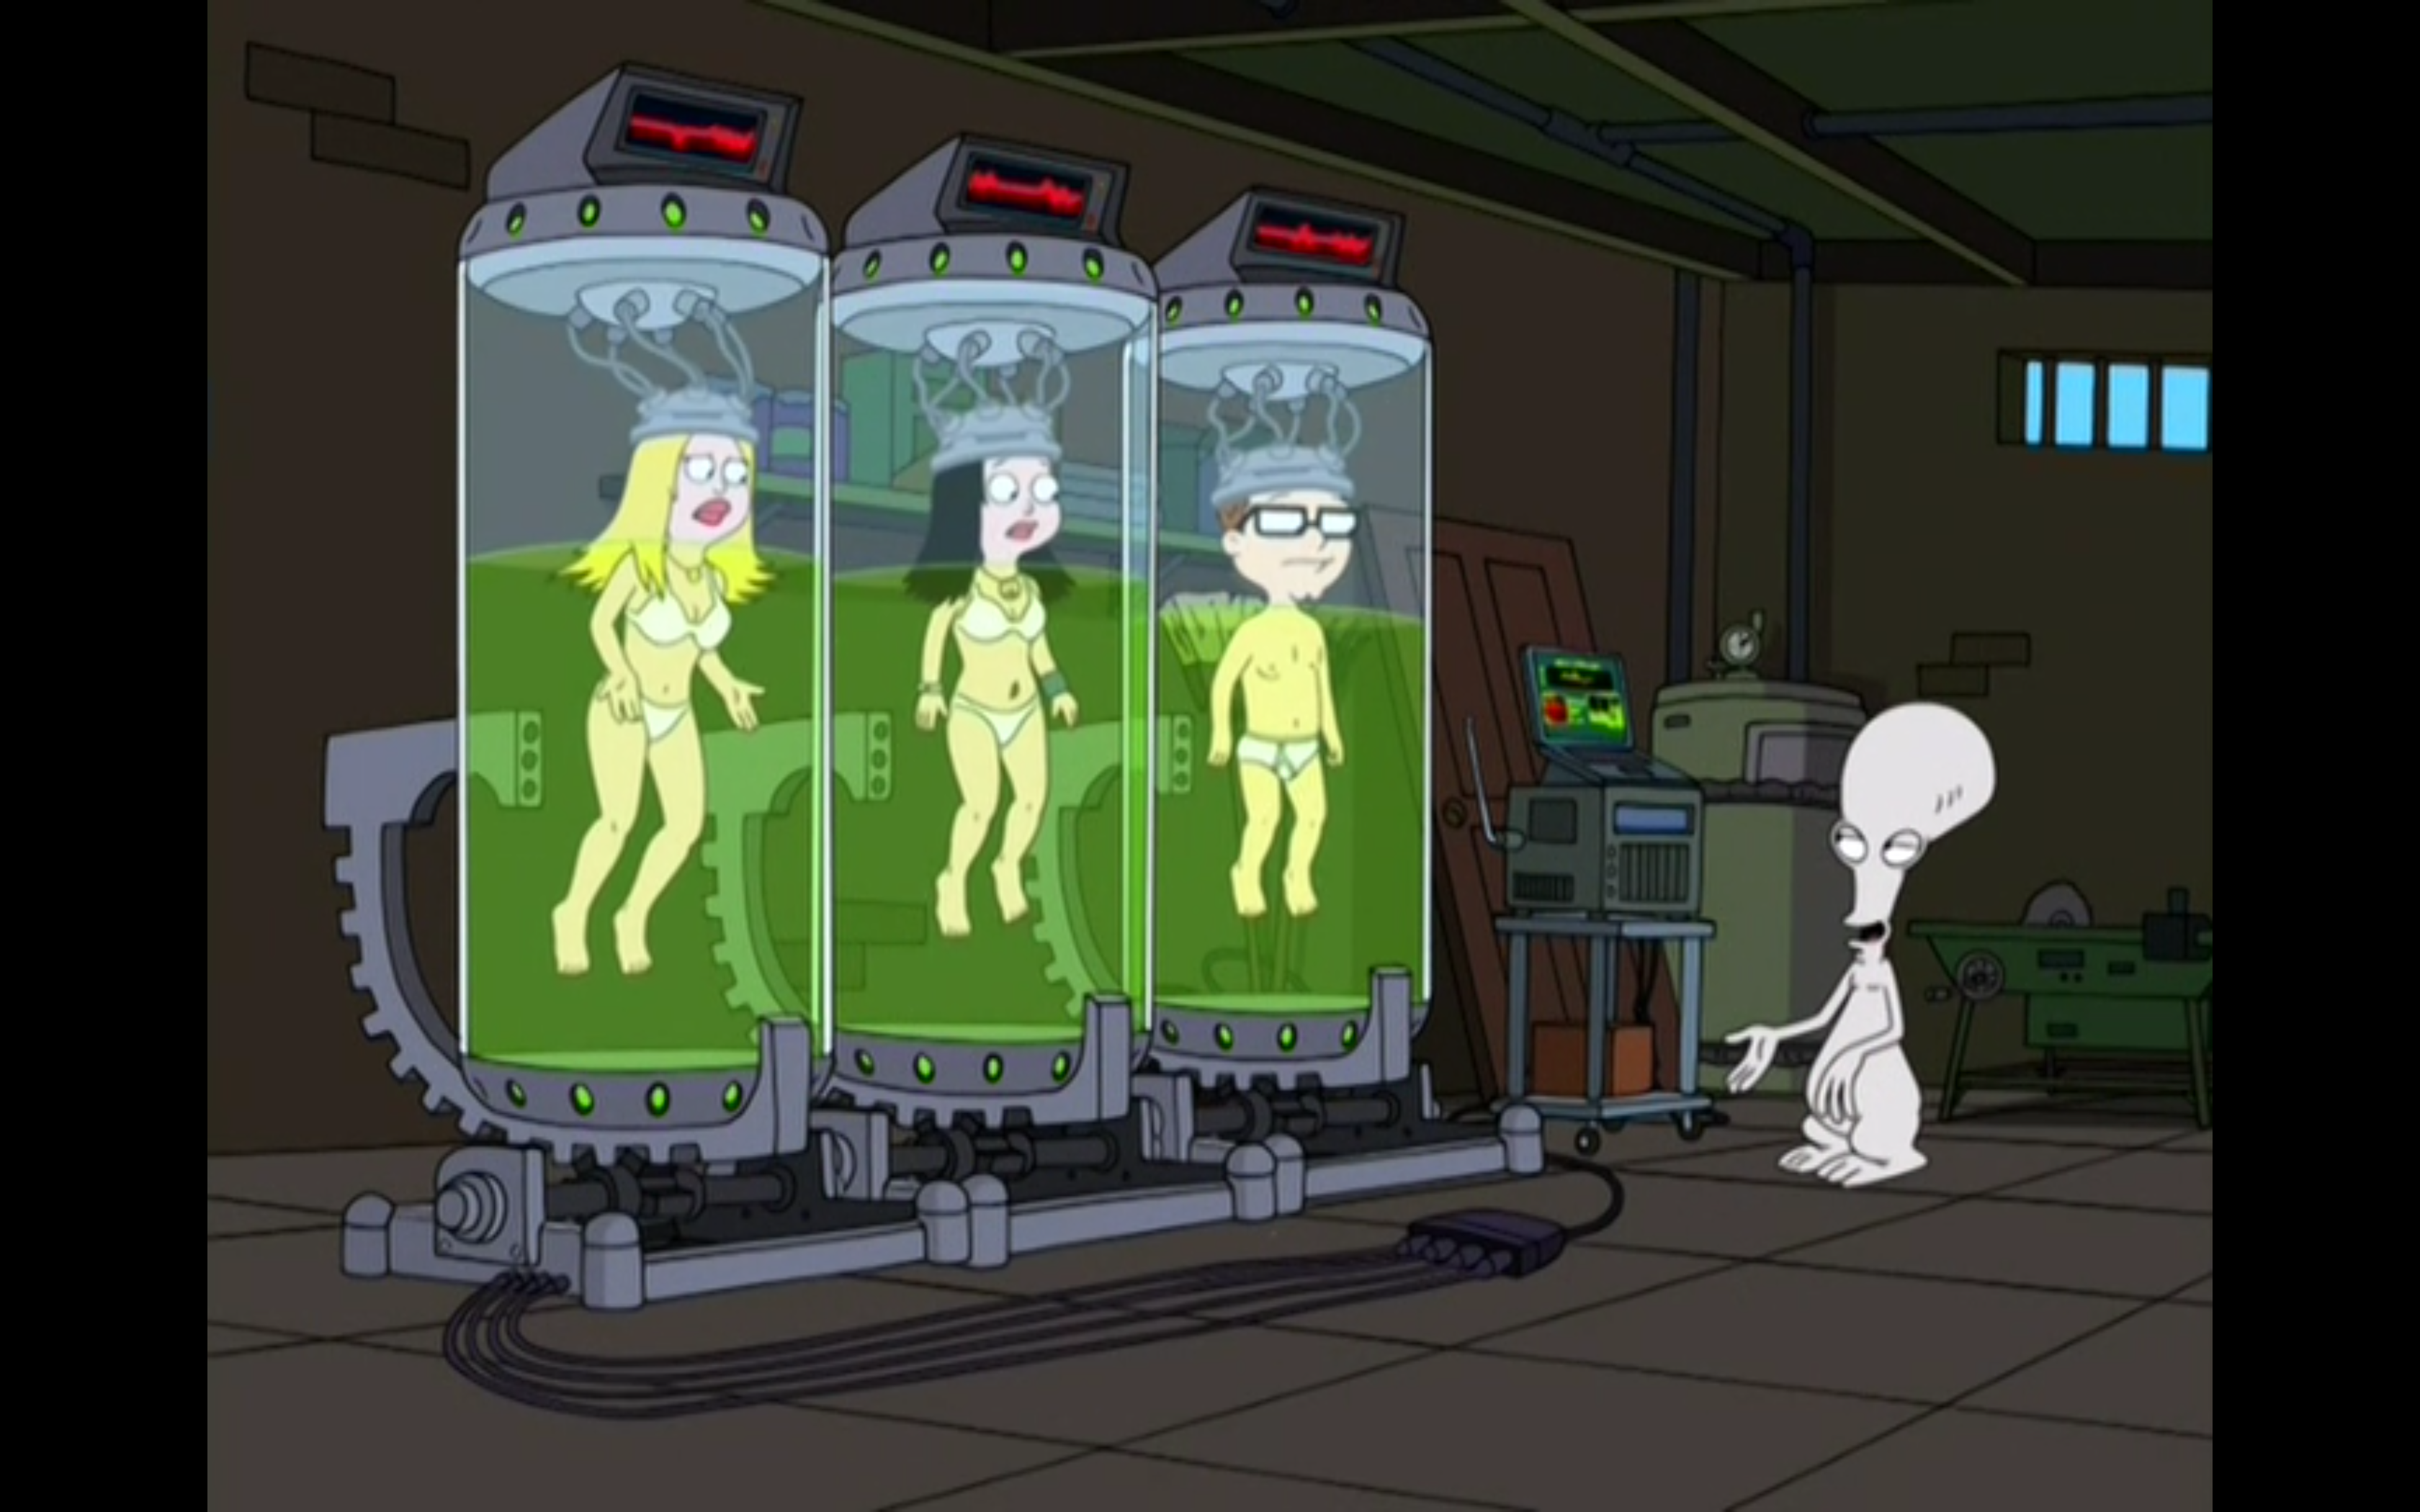 American Dad!
"the goo," a CIA device that implants false memories.